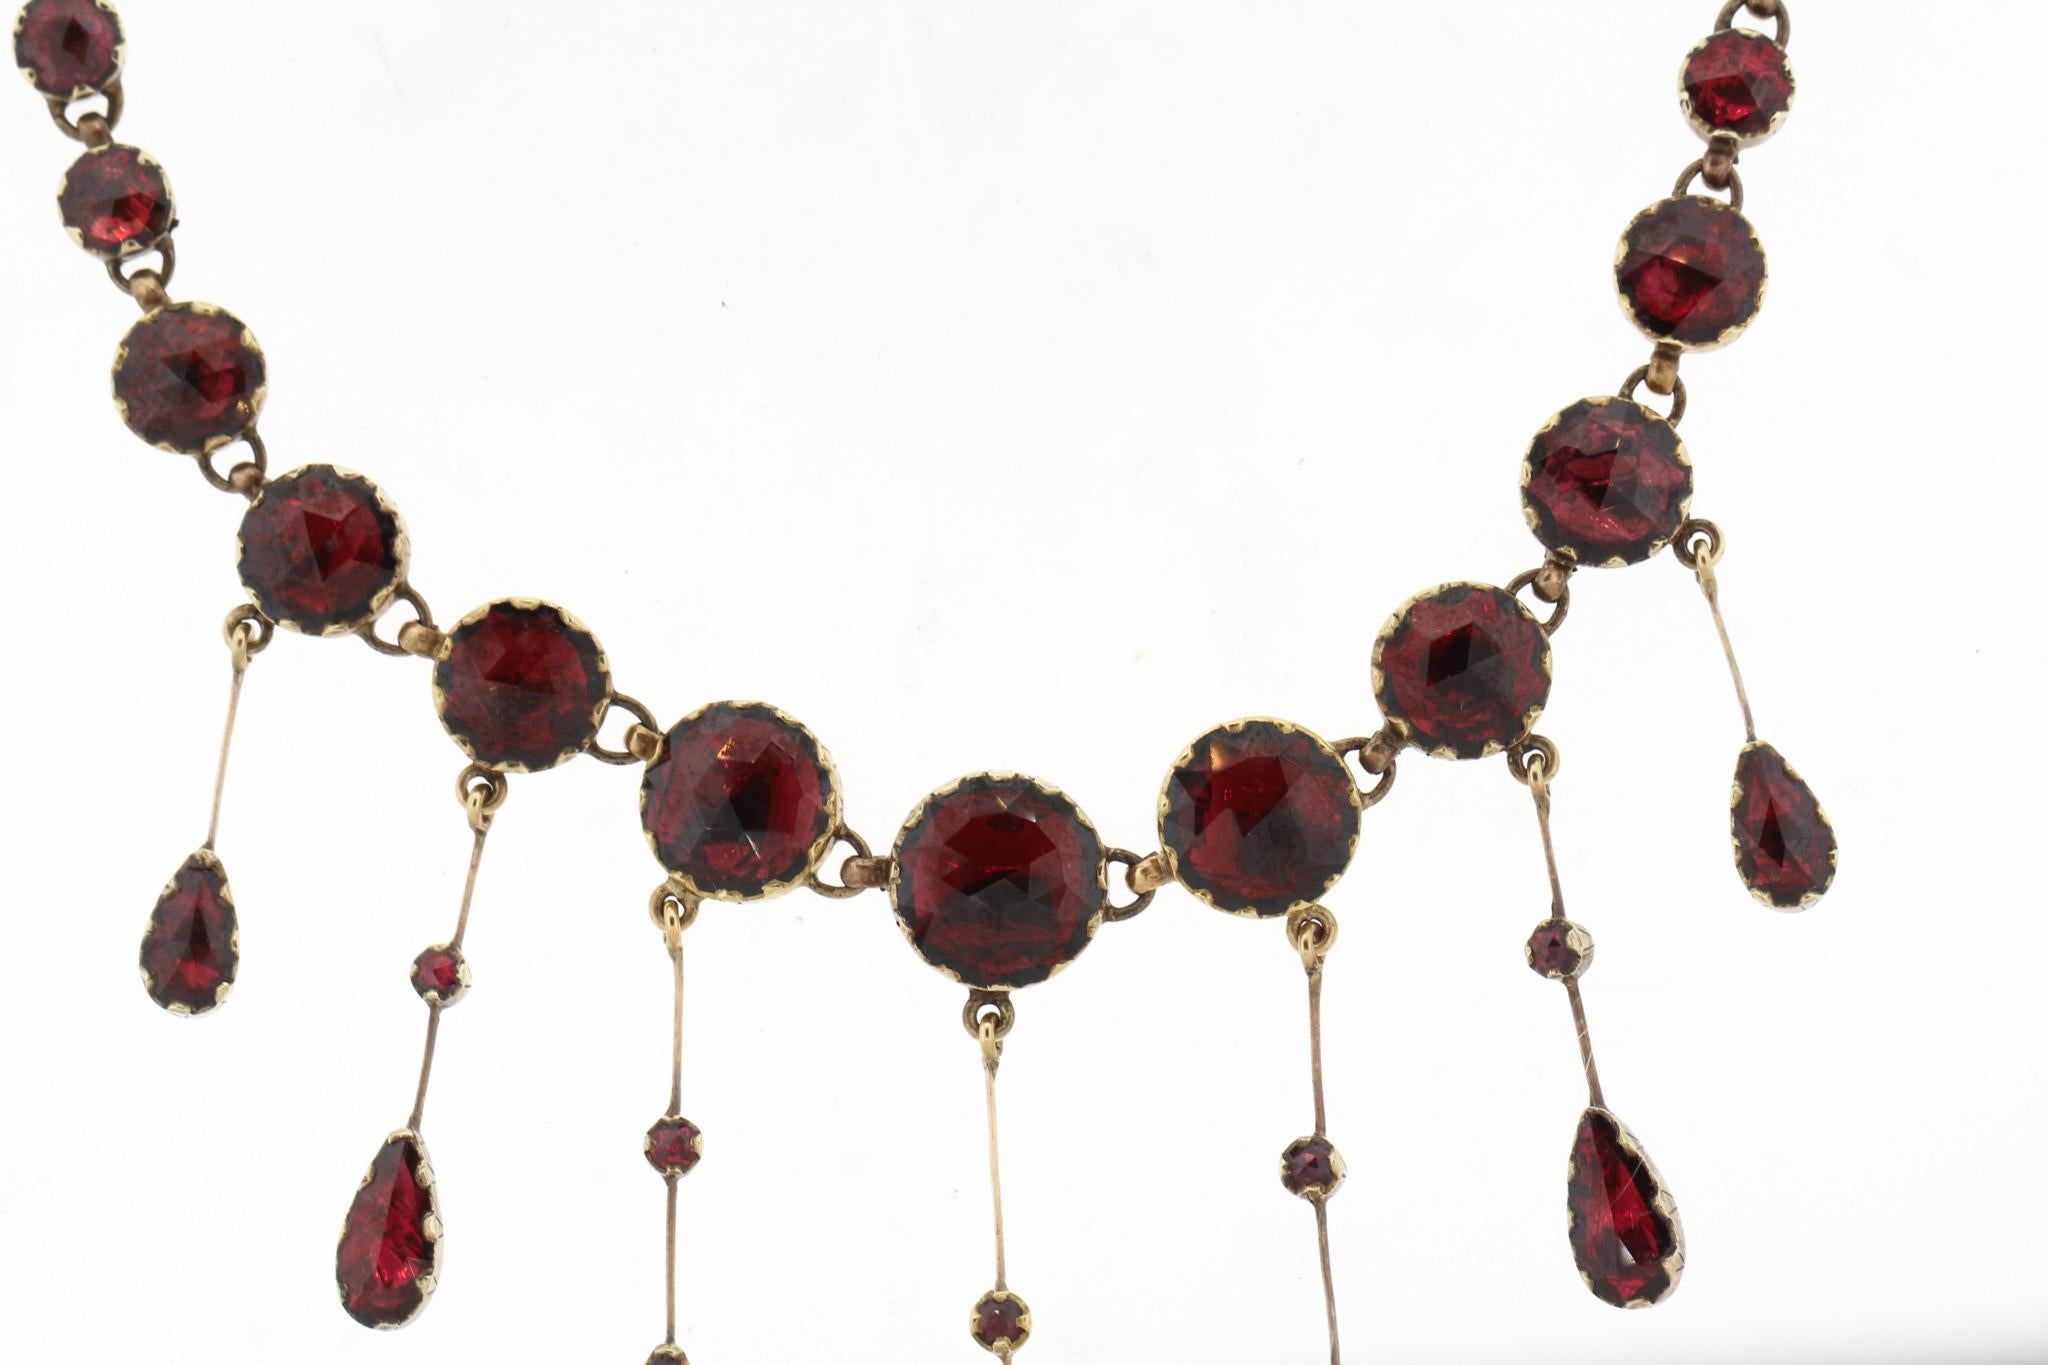 Antique 18k gold foiled back garnet necklace from the Perpignan region of France circa 1880. These fiery red garnets are cut like rose cuts, with domed tops. The unique stones are from the Northern Catalonian part of France, and the mines are now